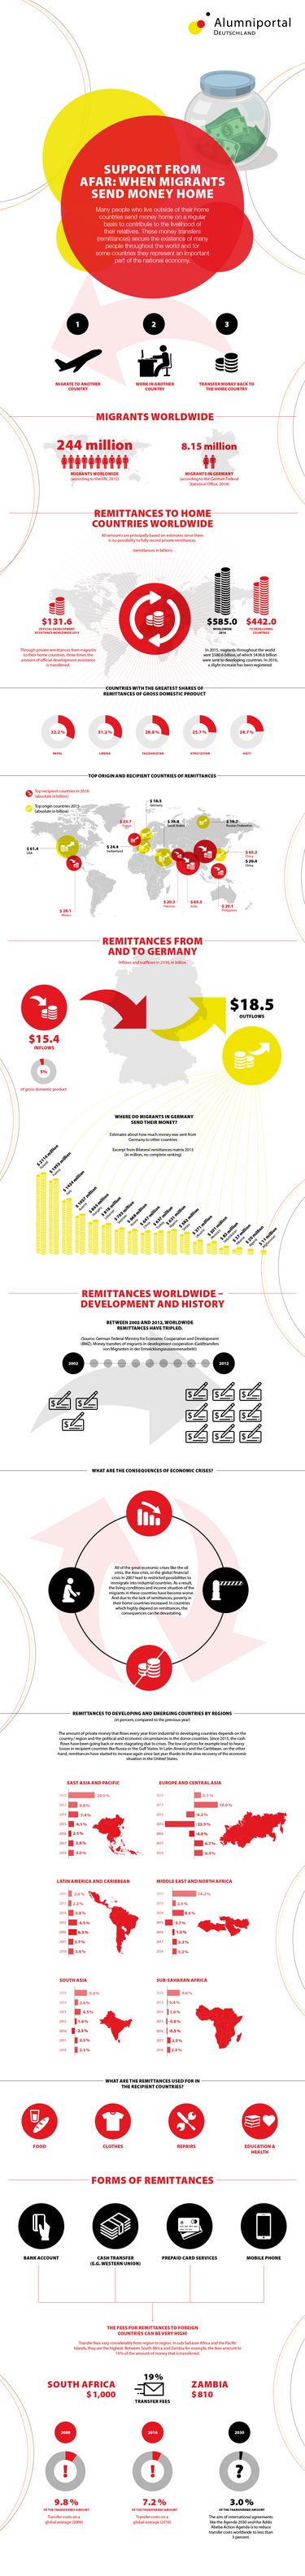 Infographic on remittances